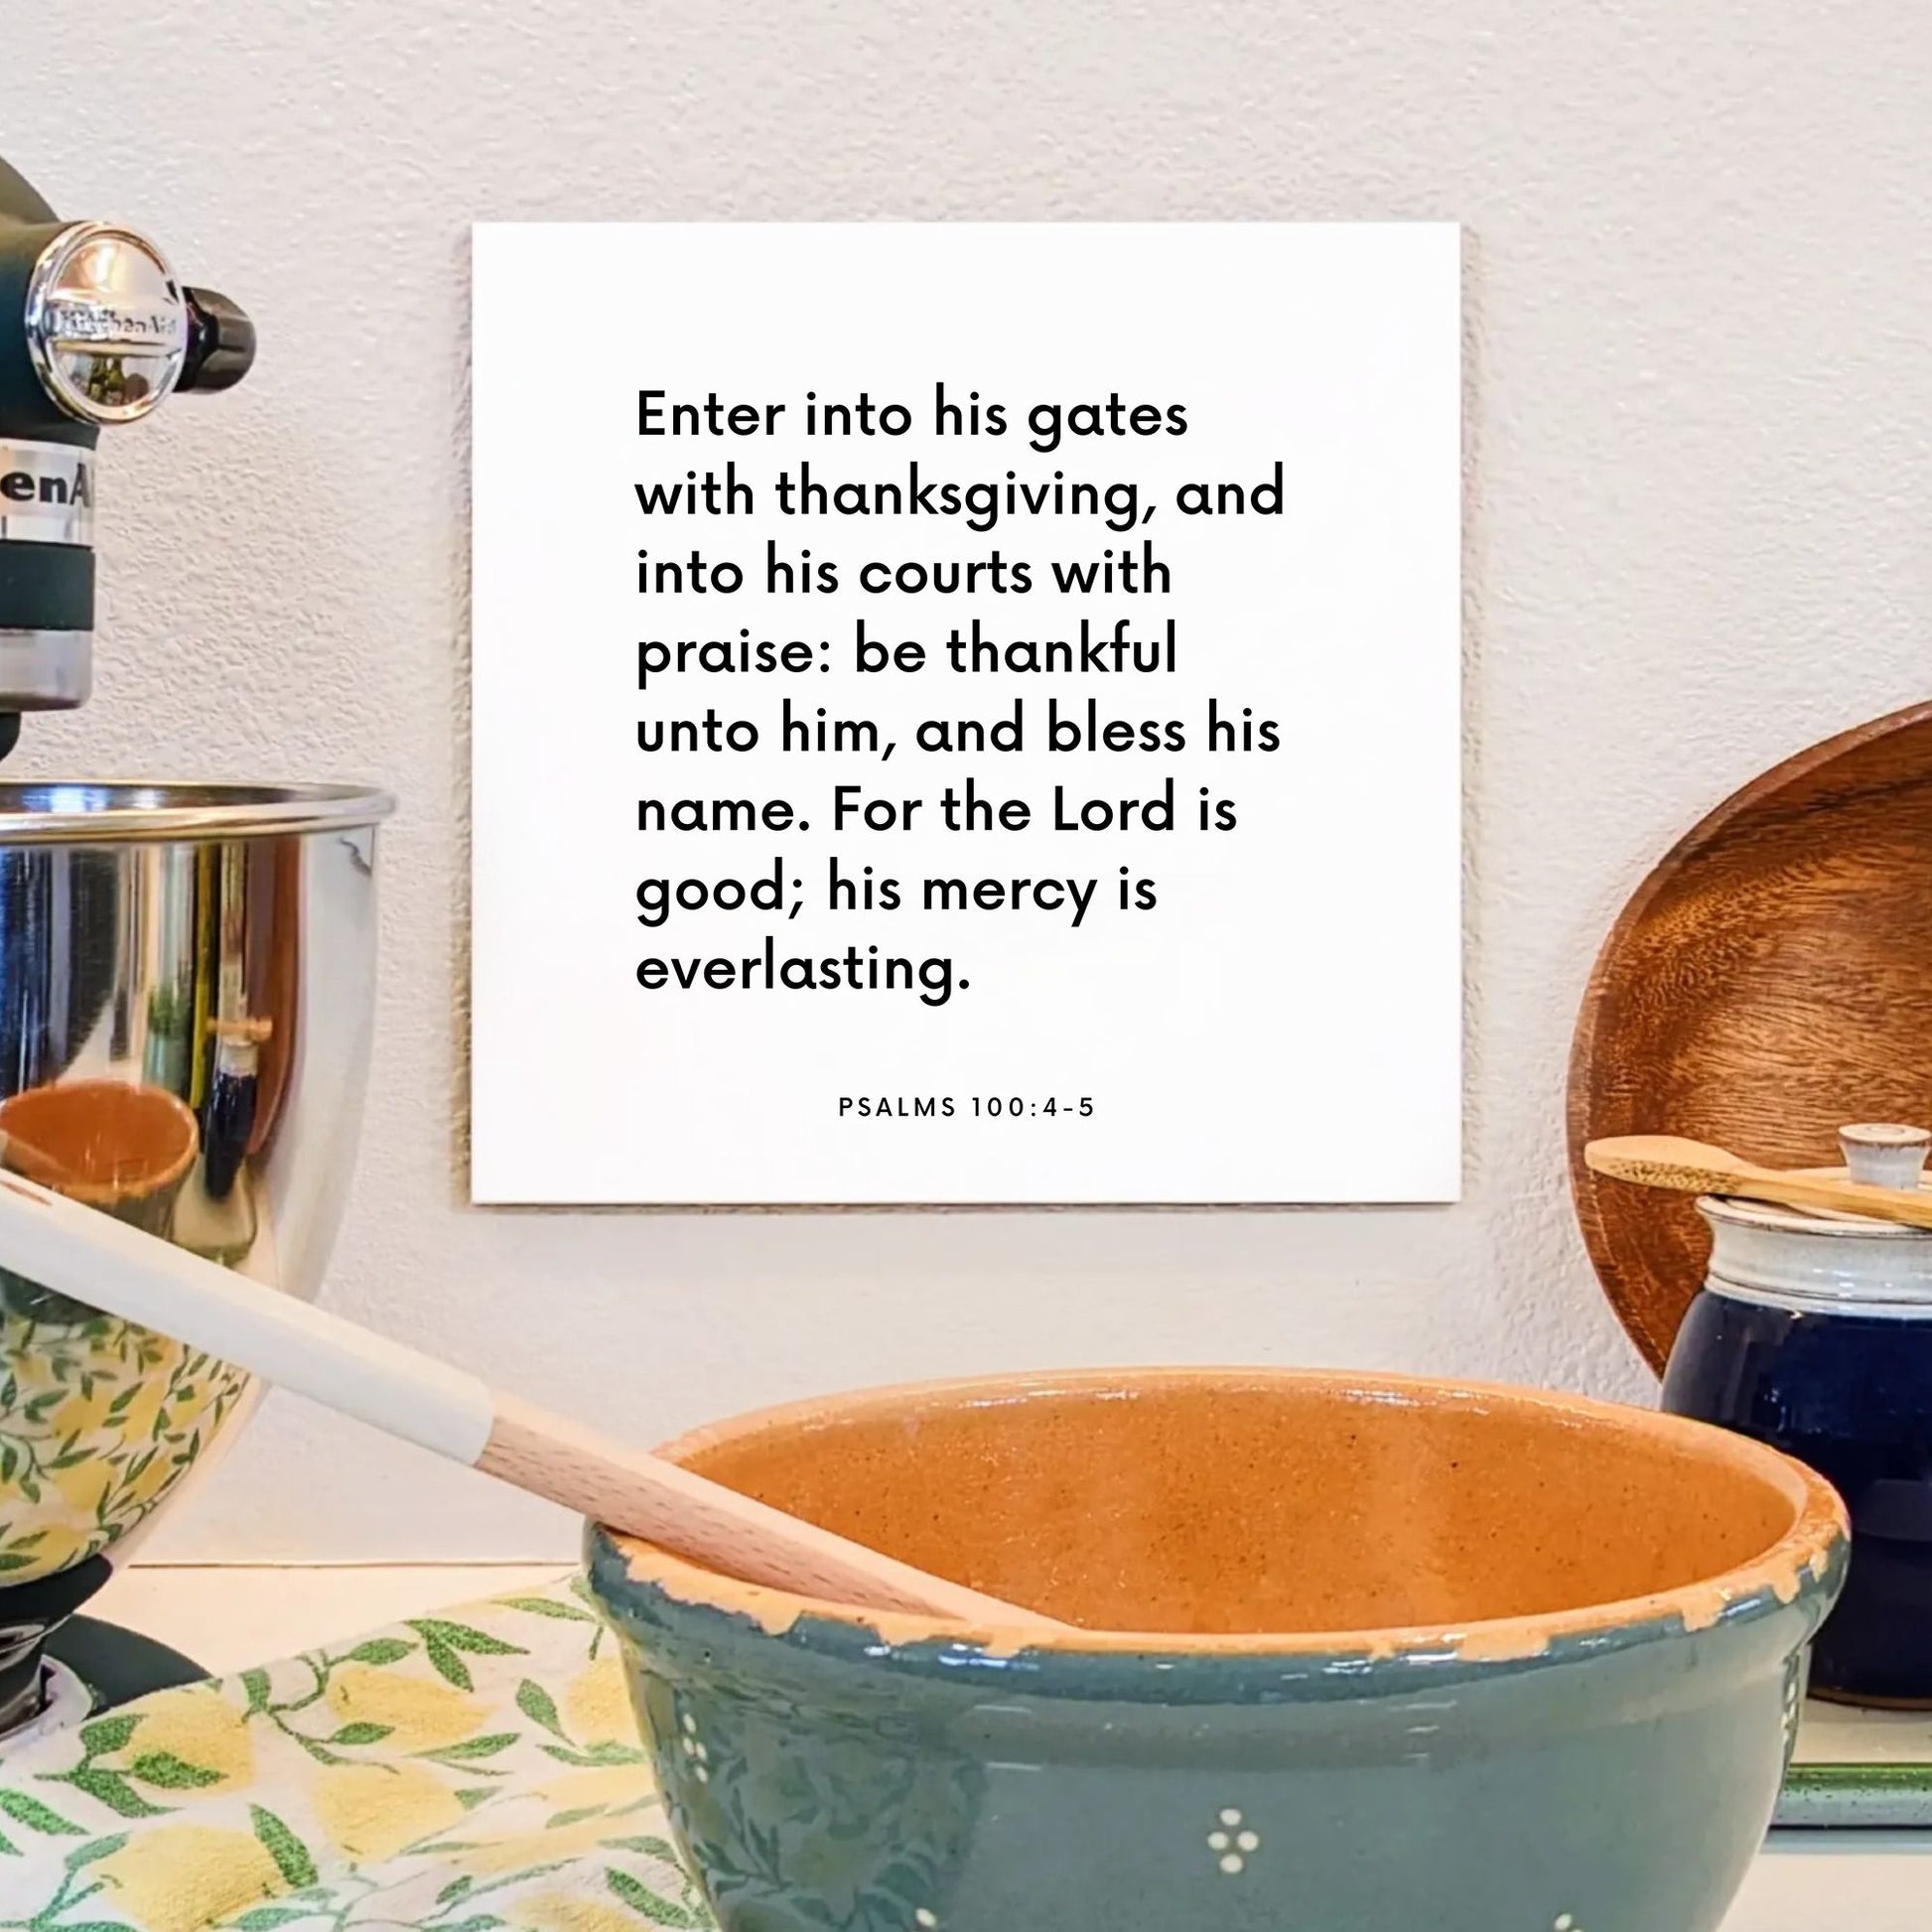 Kitchen mouting of the scripture tile for Psalms 100:4-5 - "Be thankful unto him and bless his name, for the Lord is good"